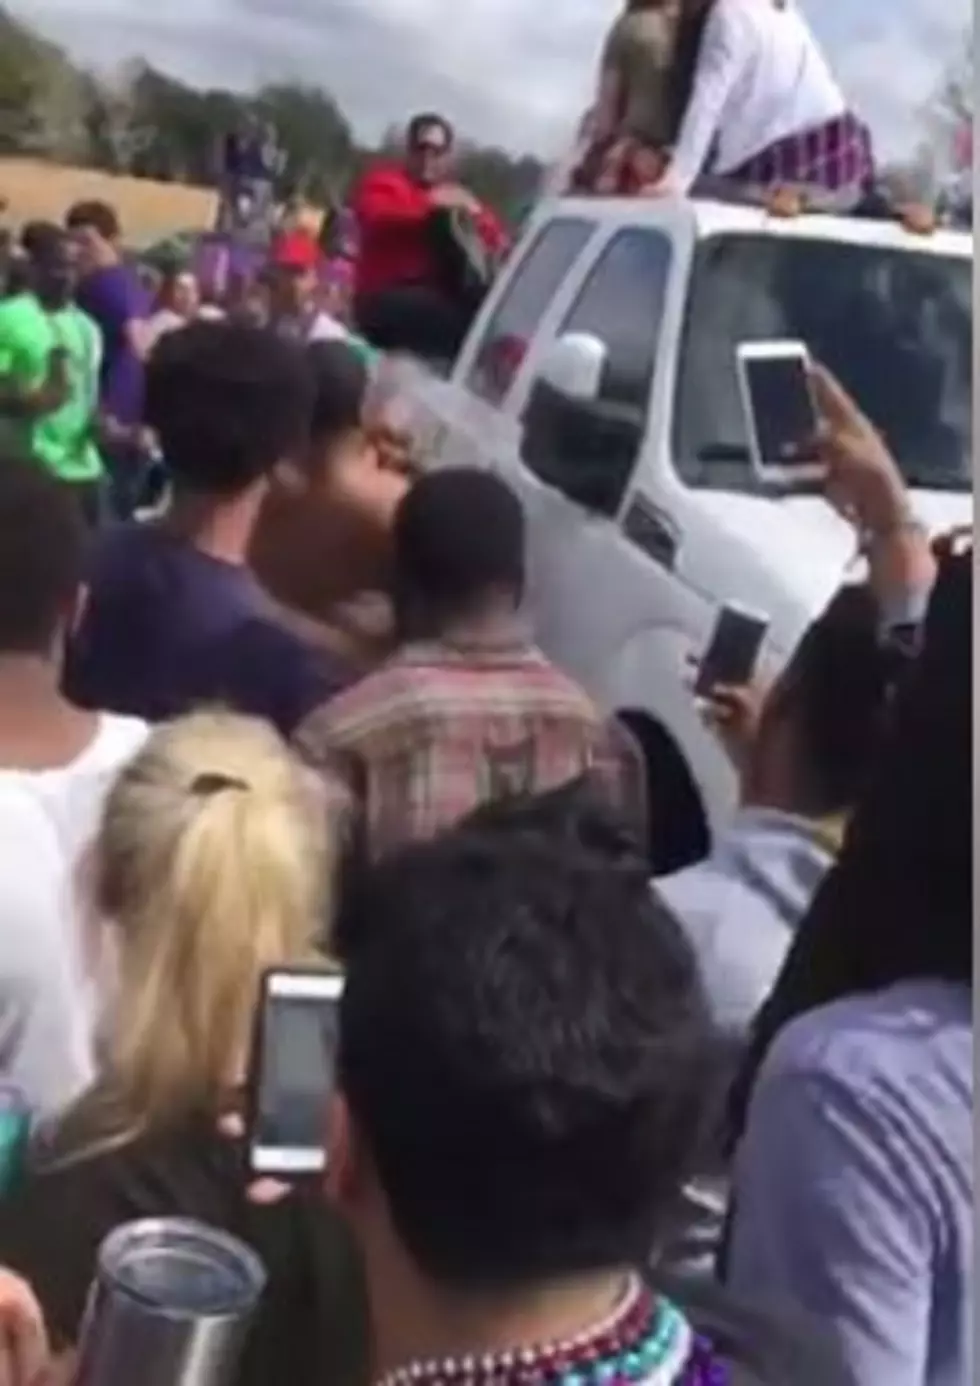 What Happens During Fight At Carencro Mardi Gras Is Disturbing [VIDEO]